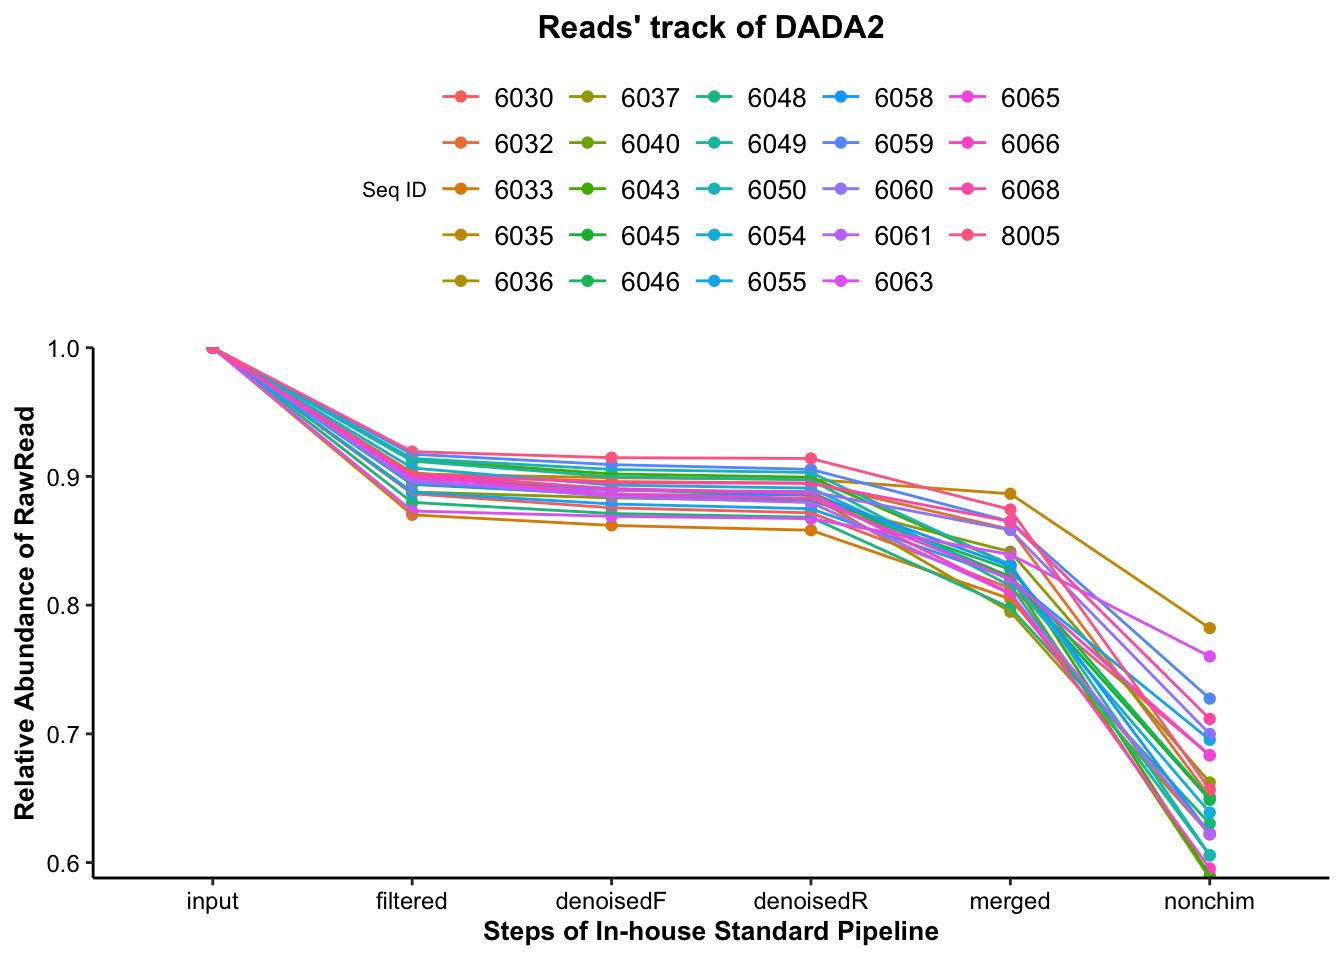 Reads' track of DADA2